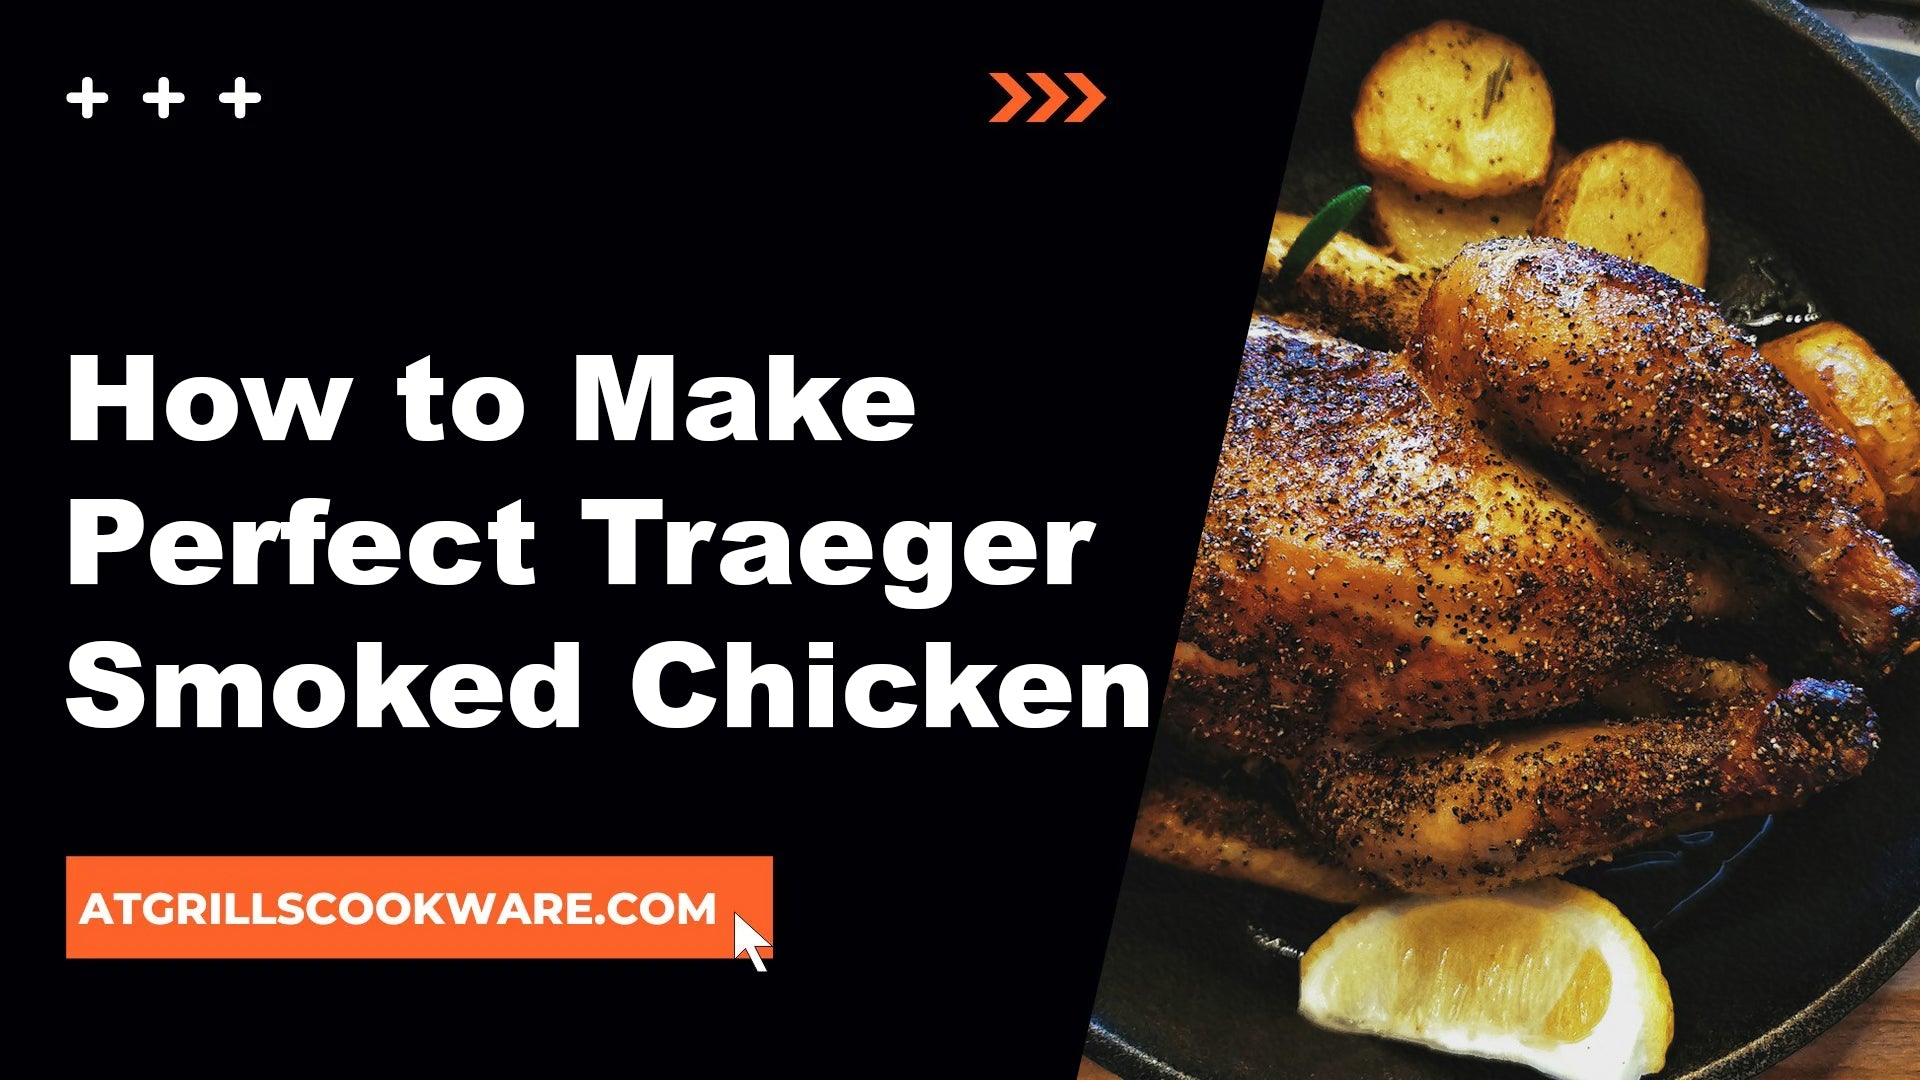 How to Make Perfect Traeger Smoked Chicken